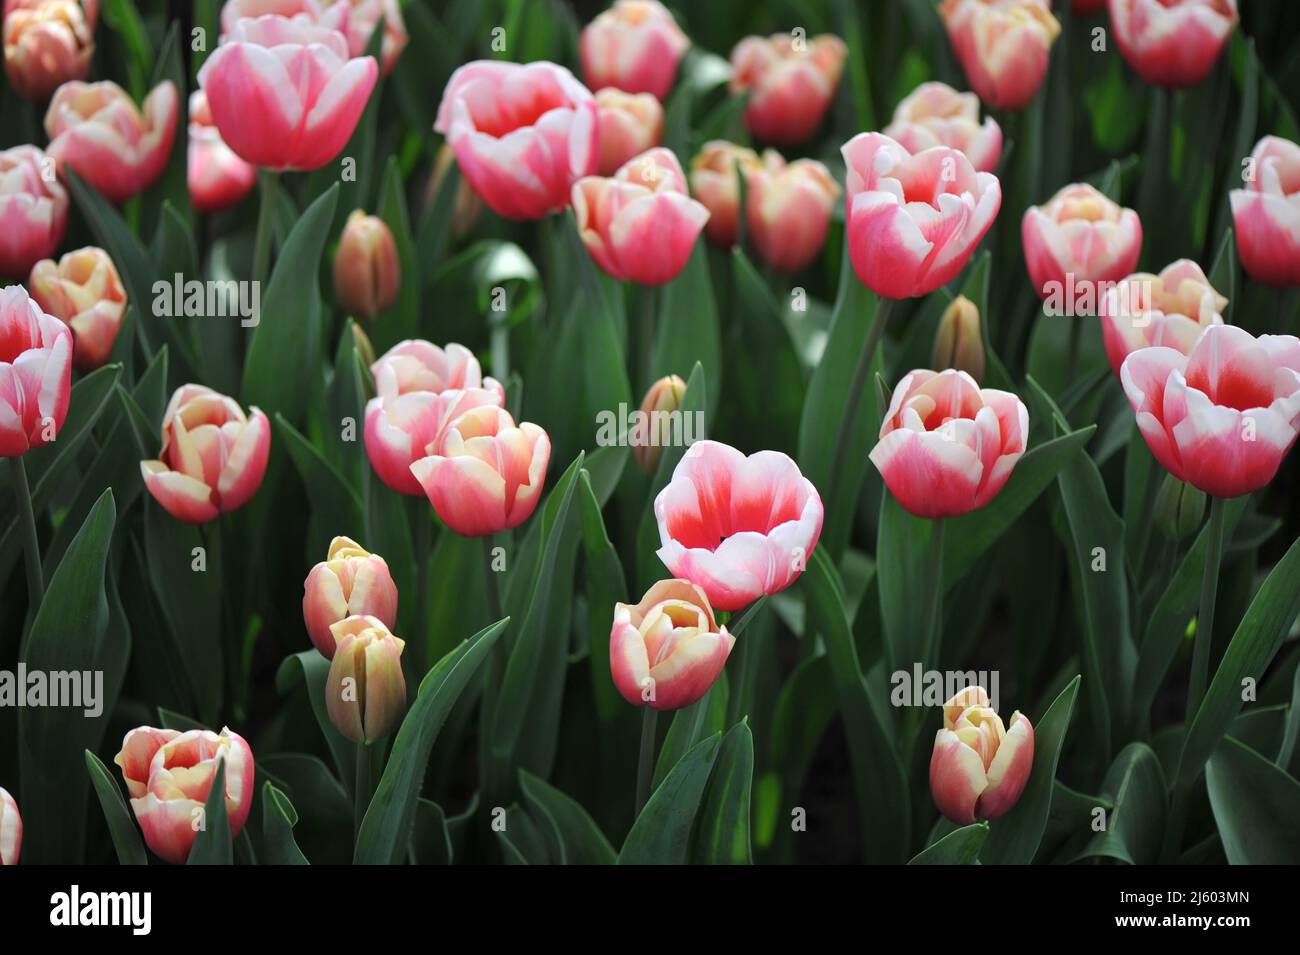 Pink with white edges Triumph tulips (Tulipa) Lech Walesa bloom in a garden in March Stock Photo